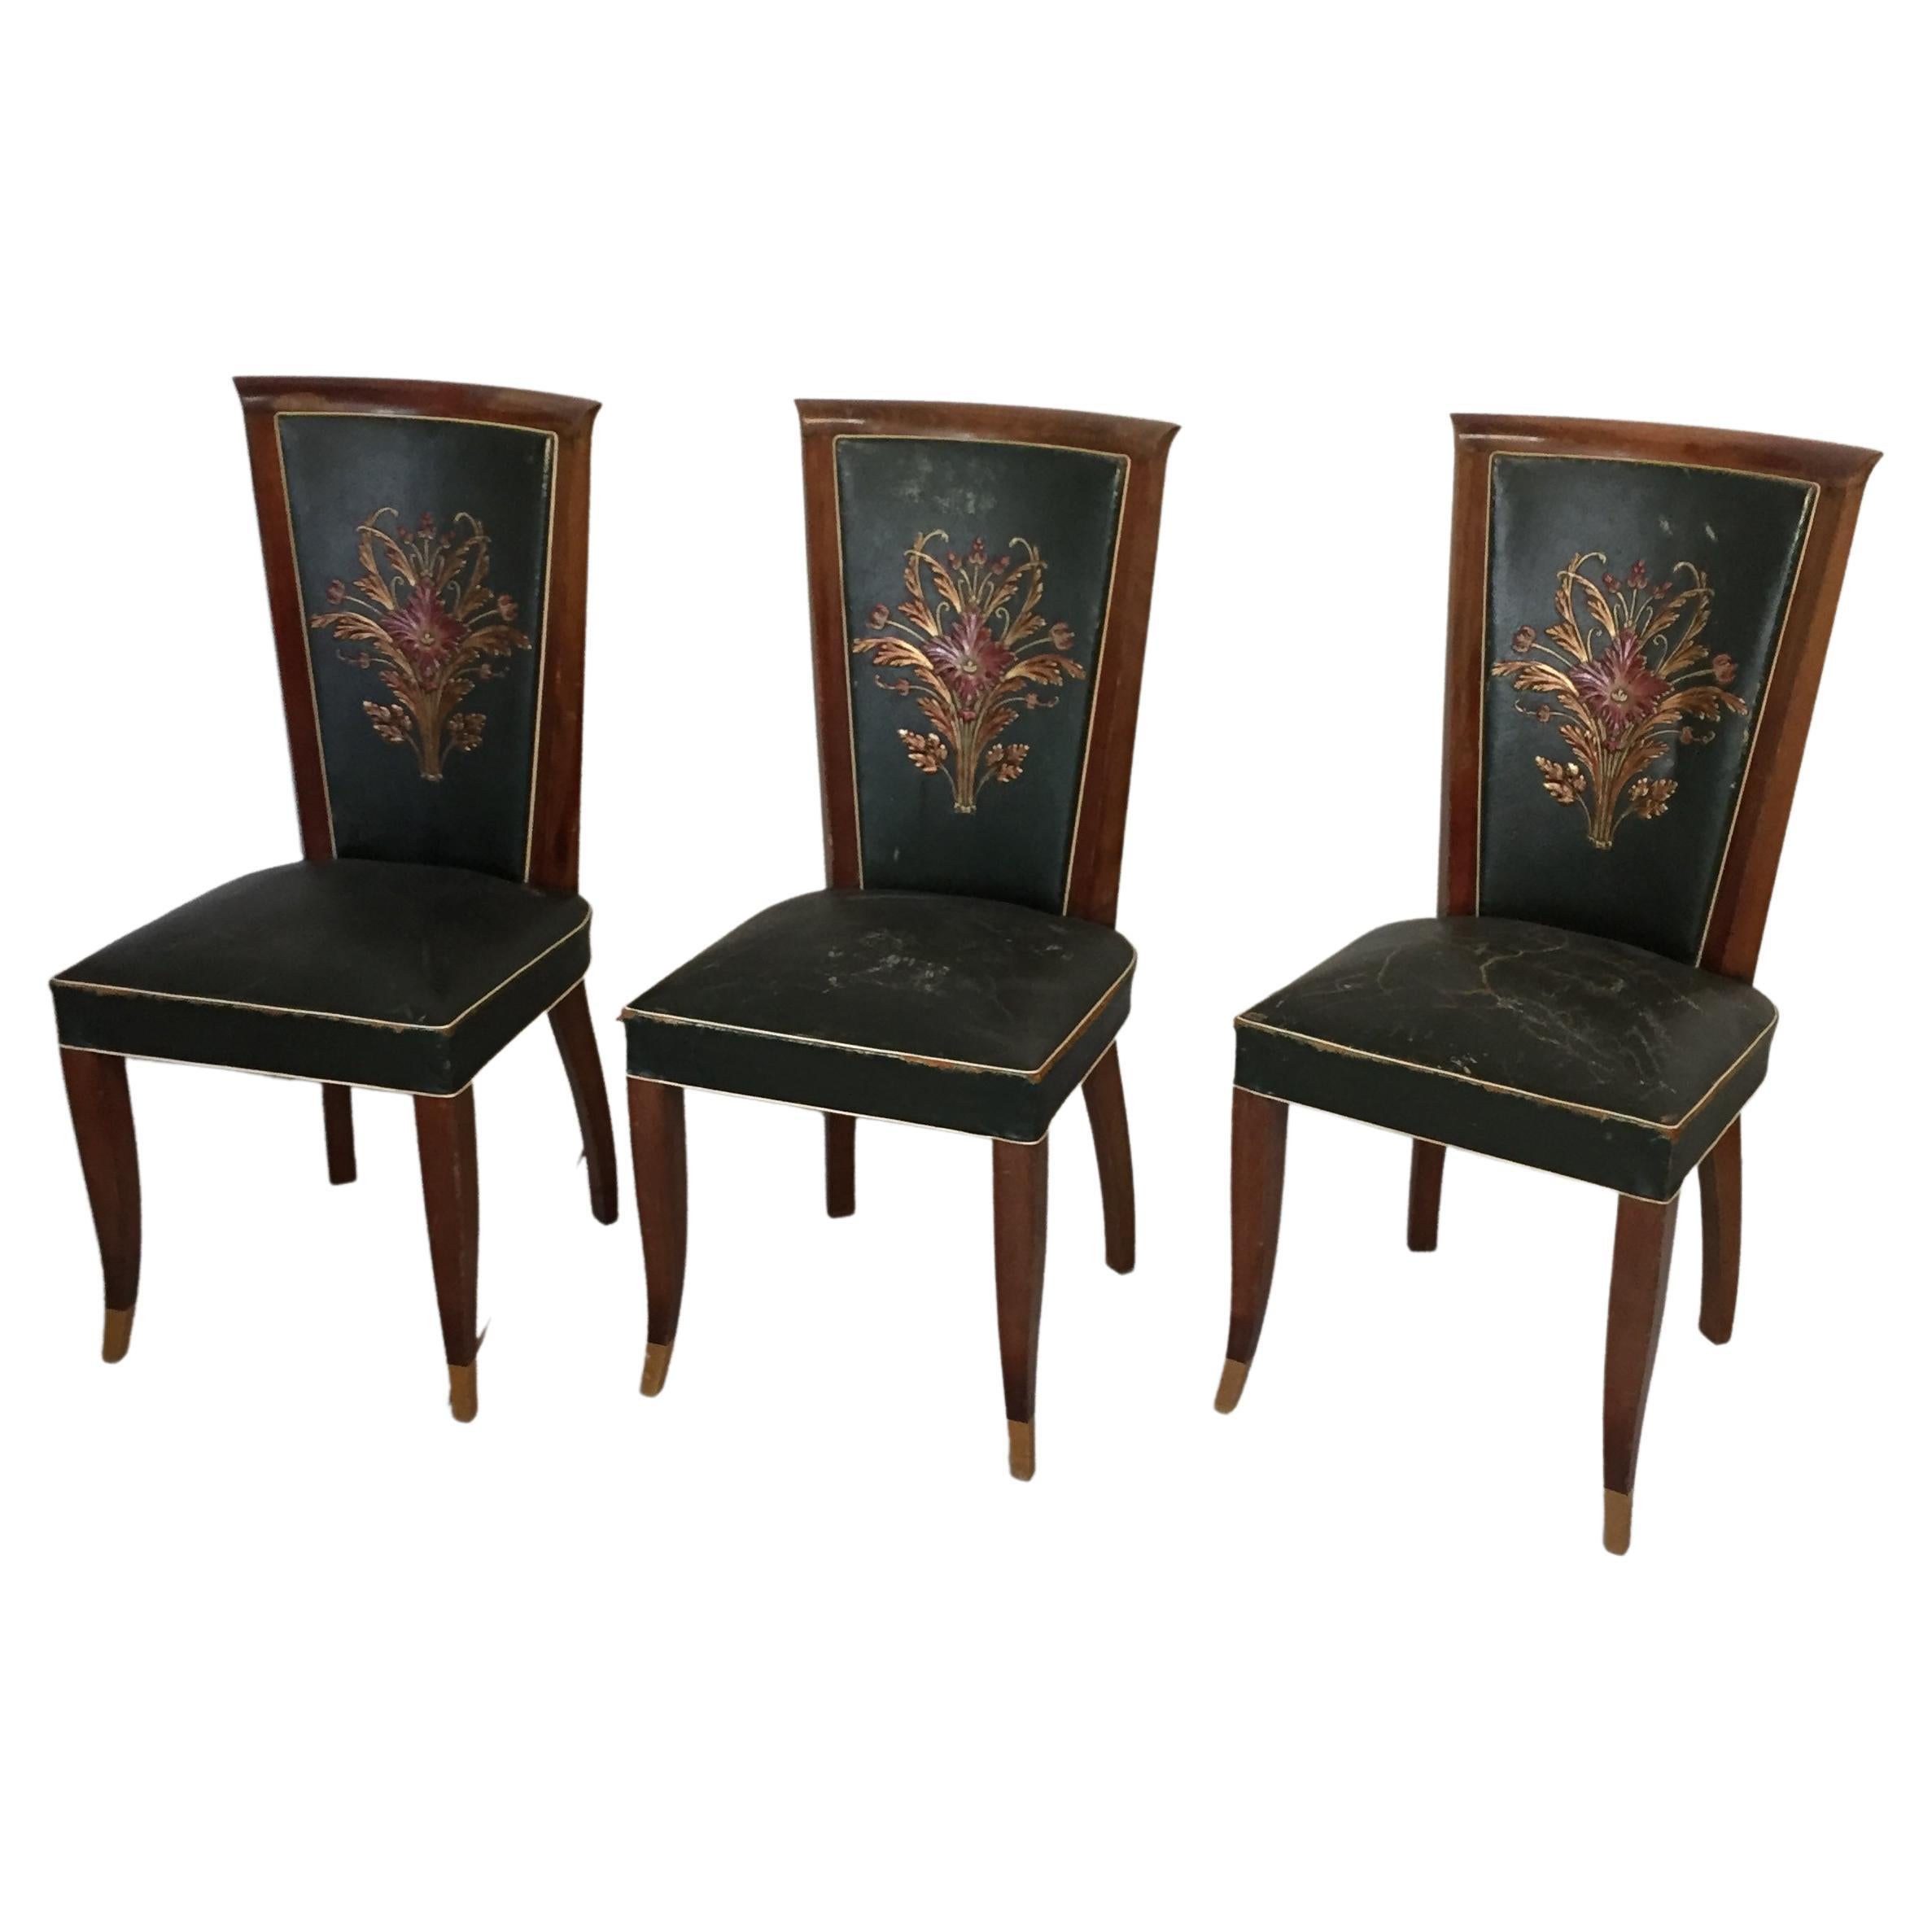 Six Art Deco Chairs in Green Leather Original Condition For Sale